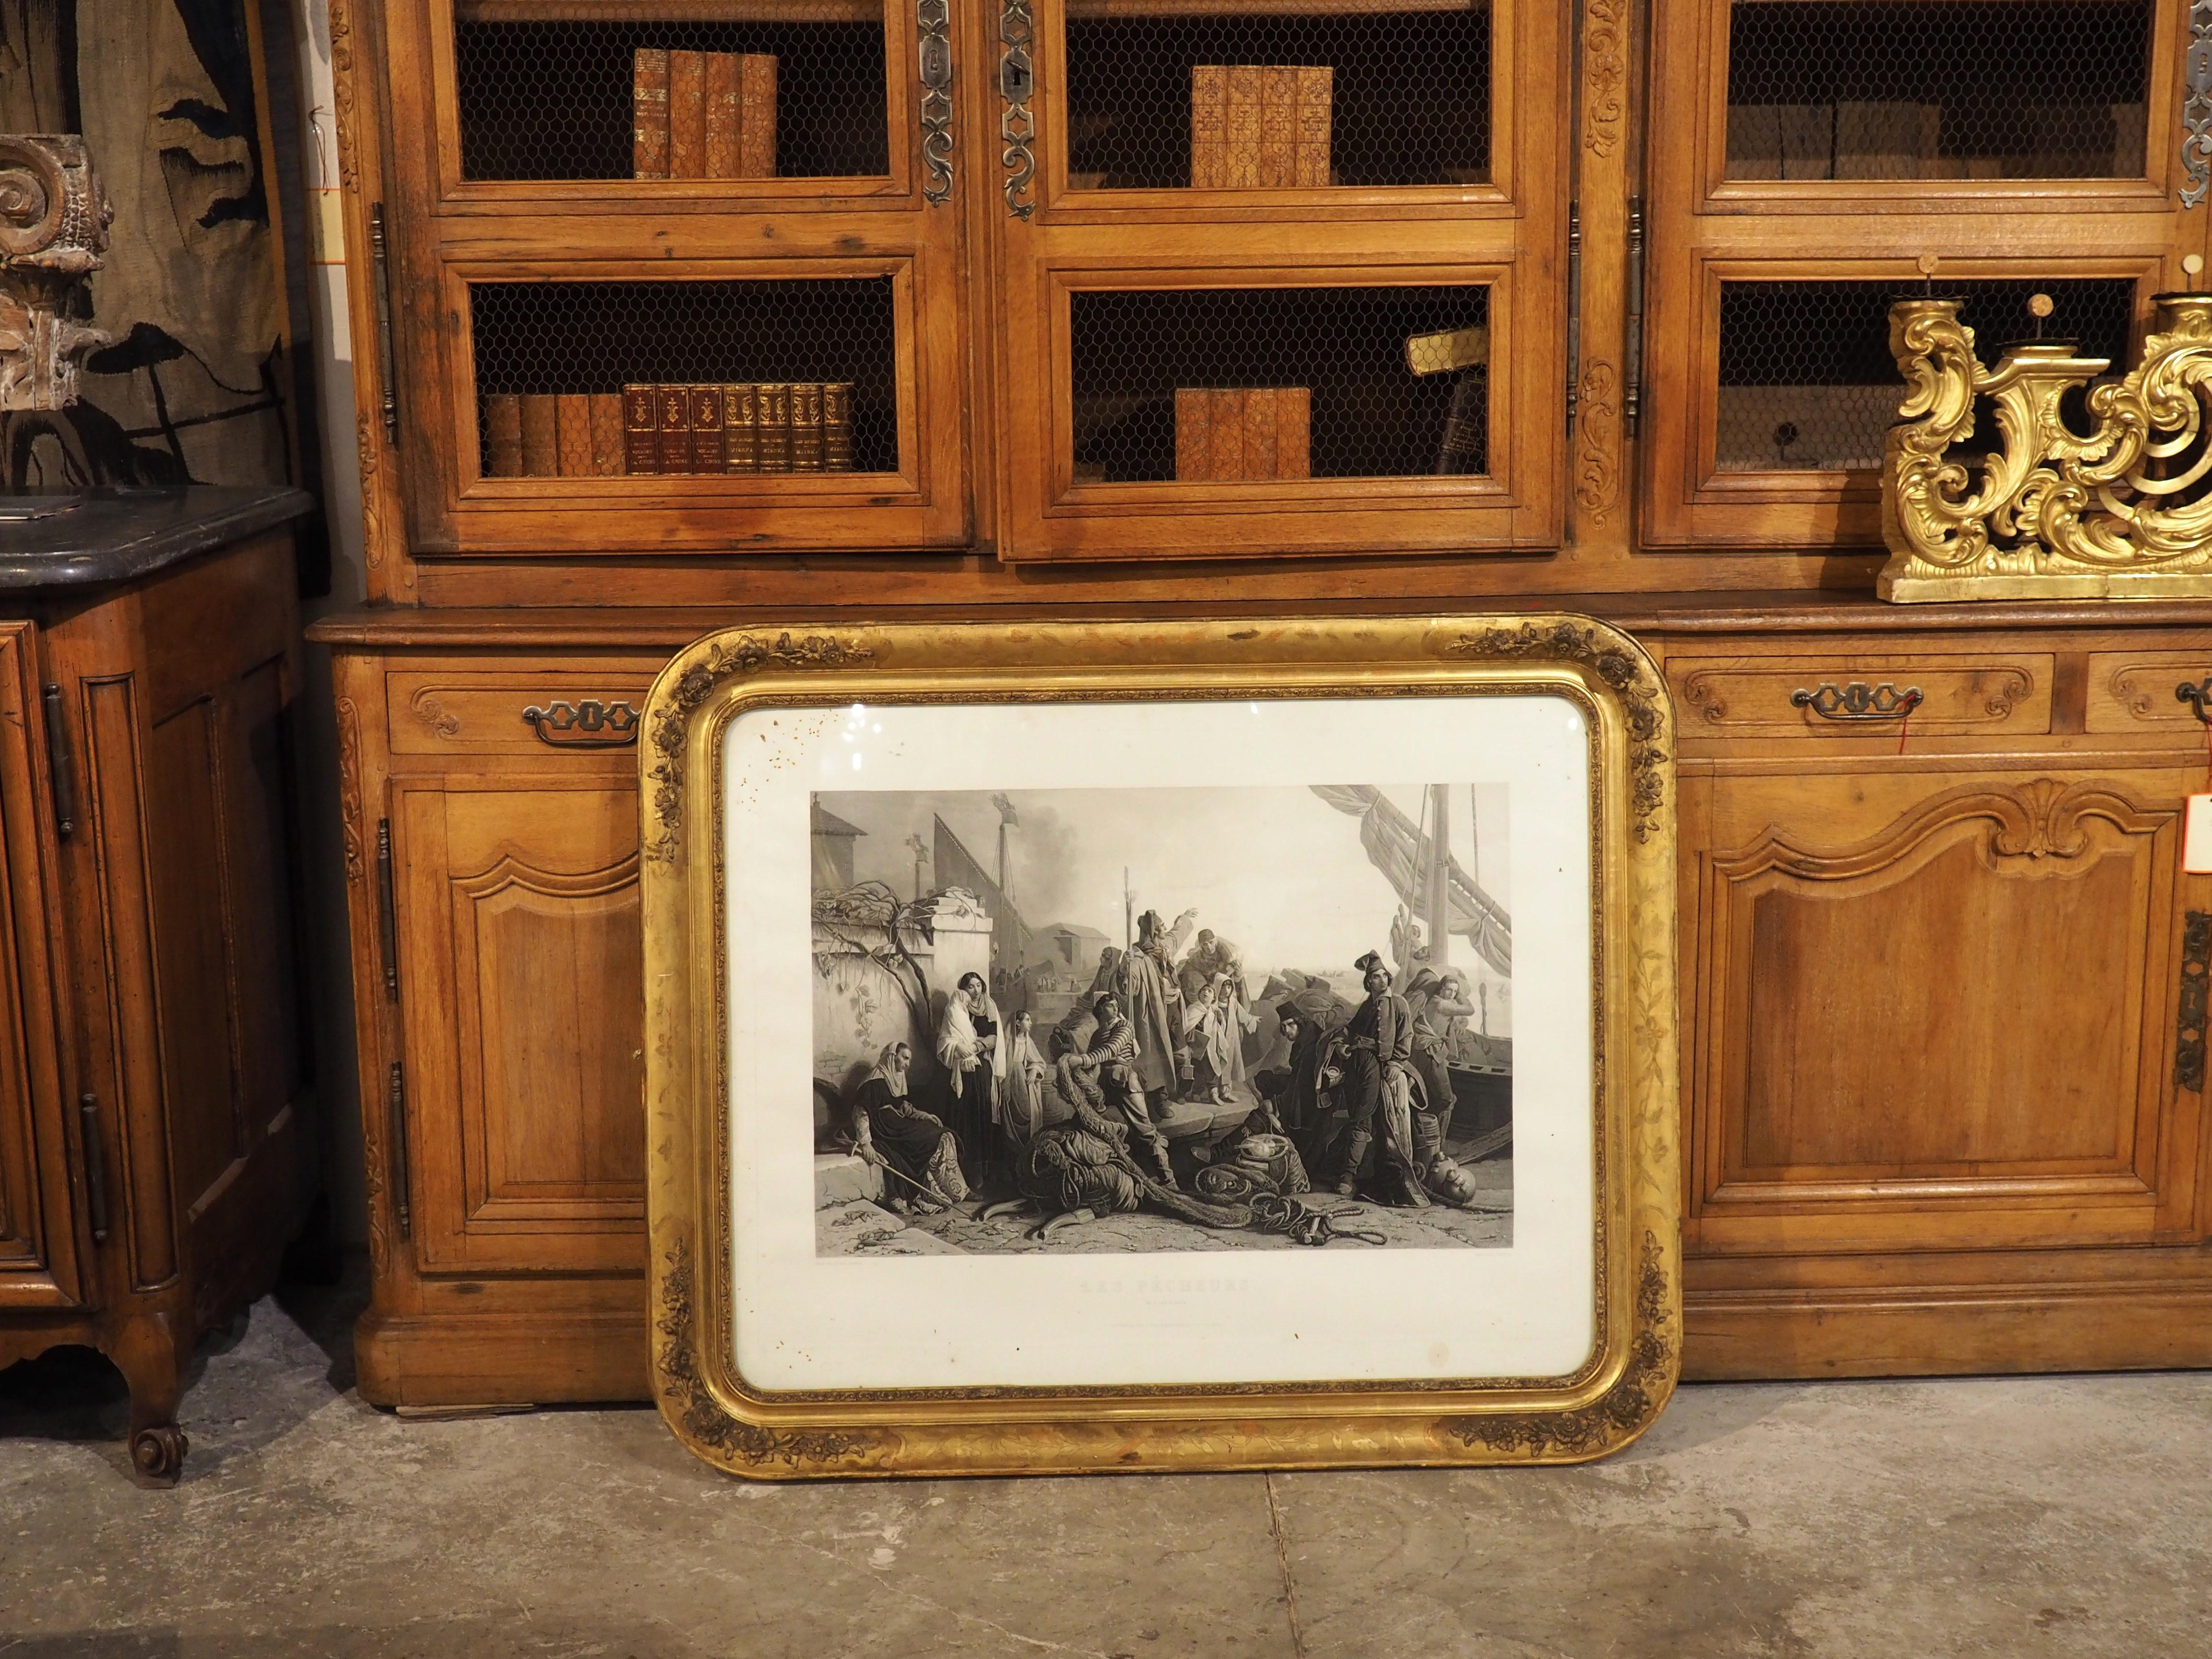 Entitled Les Pecheurs de L’Adriatique (“The Fishermen of the Adriatic”), this 19th-century engraving is after the original 1834/1835 painting by Léopold Robert. The print is encased in glass and surrounded by a wonderfully hand-carved giltwood frame